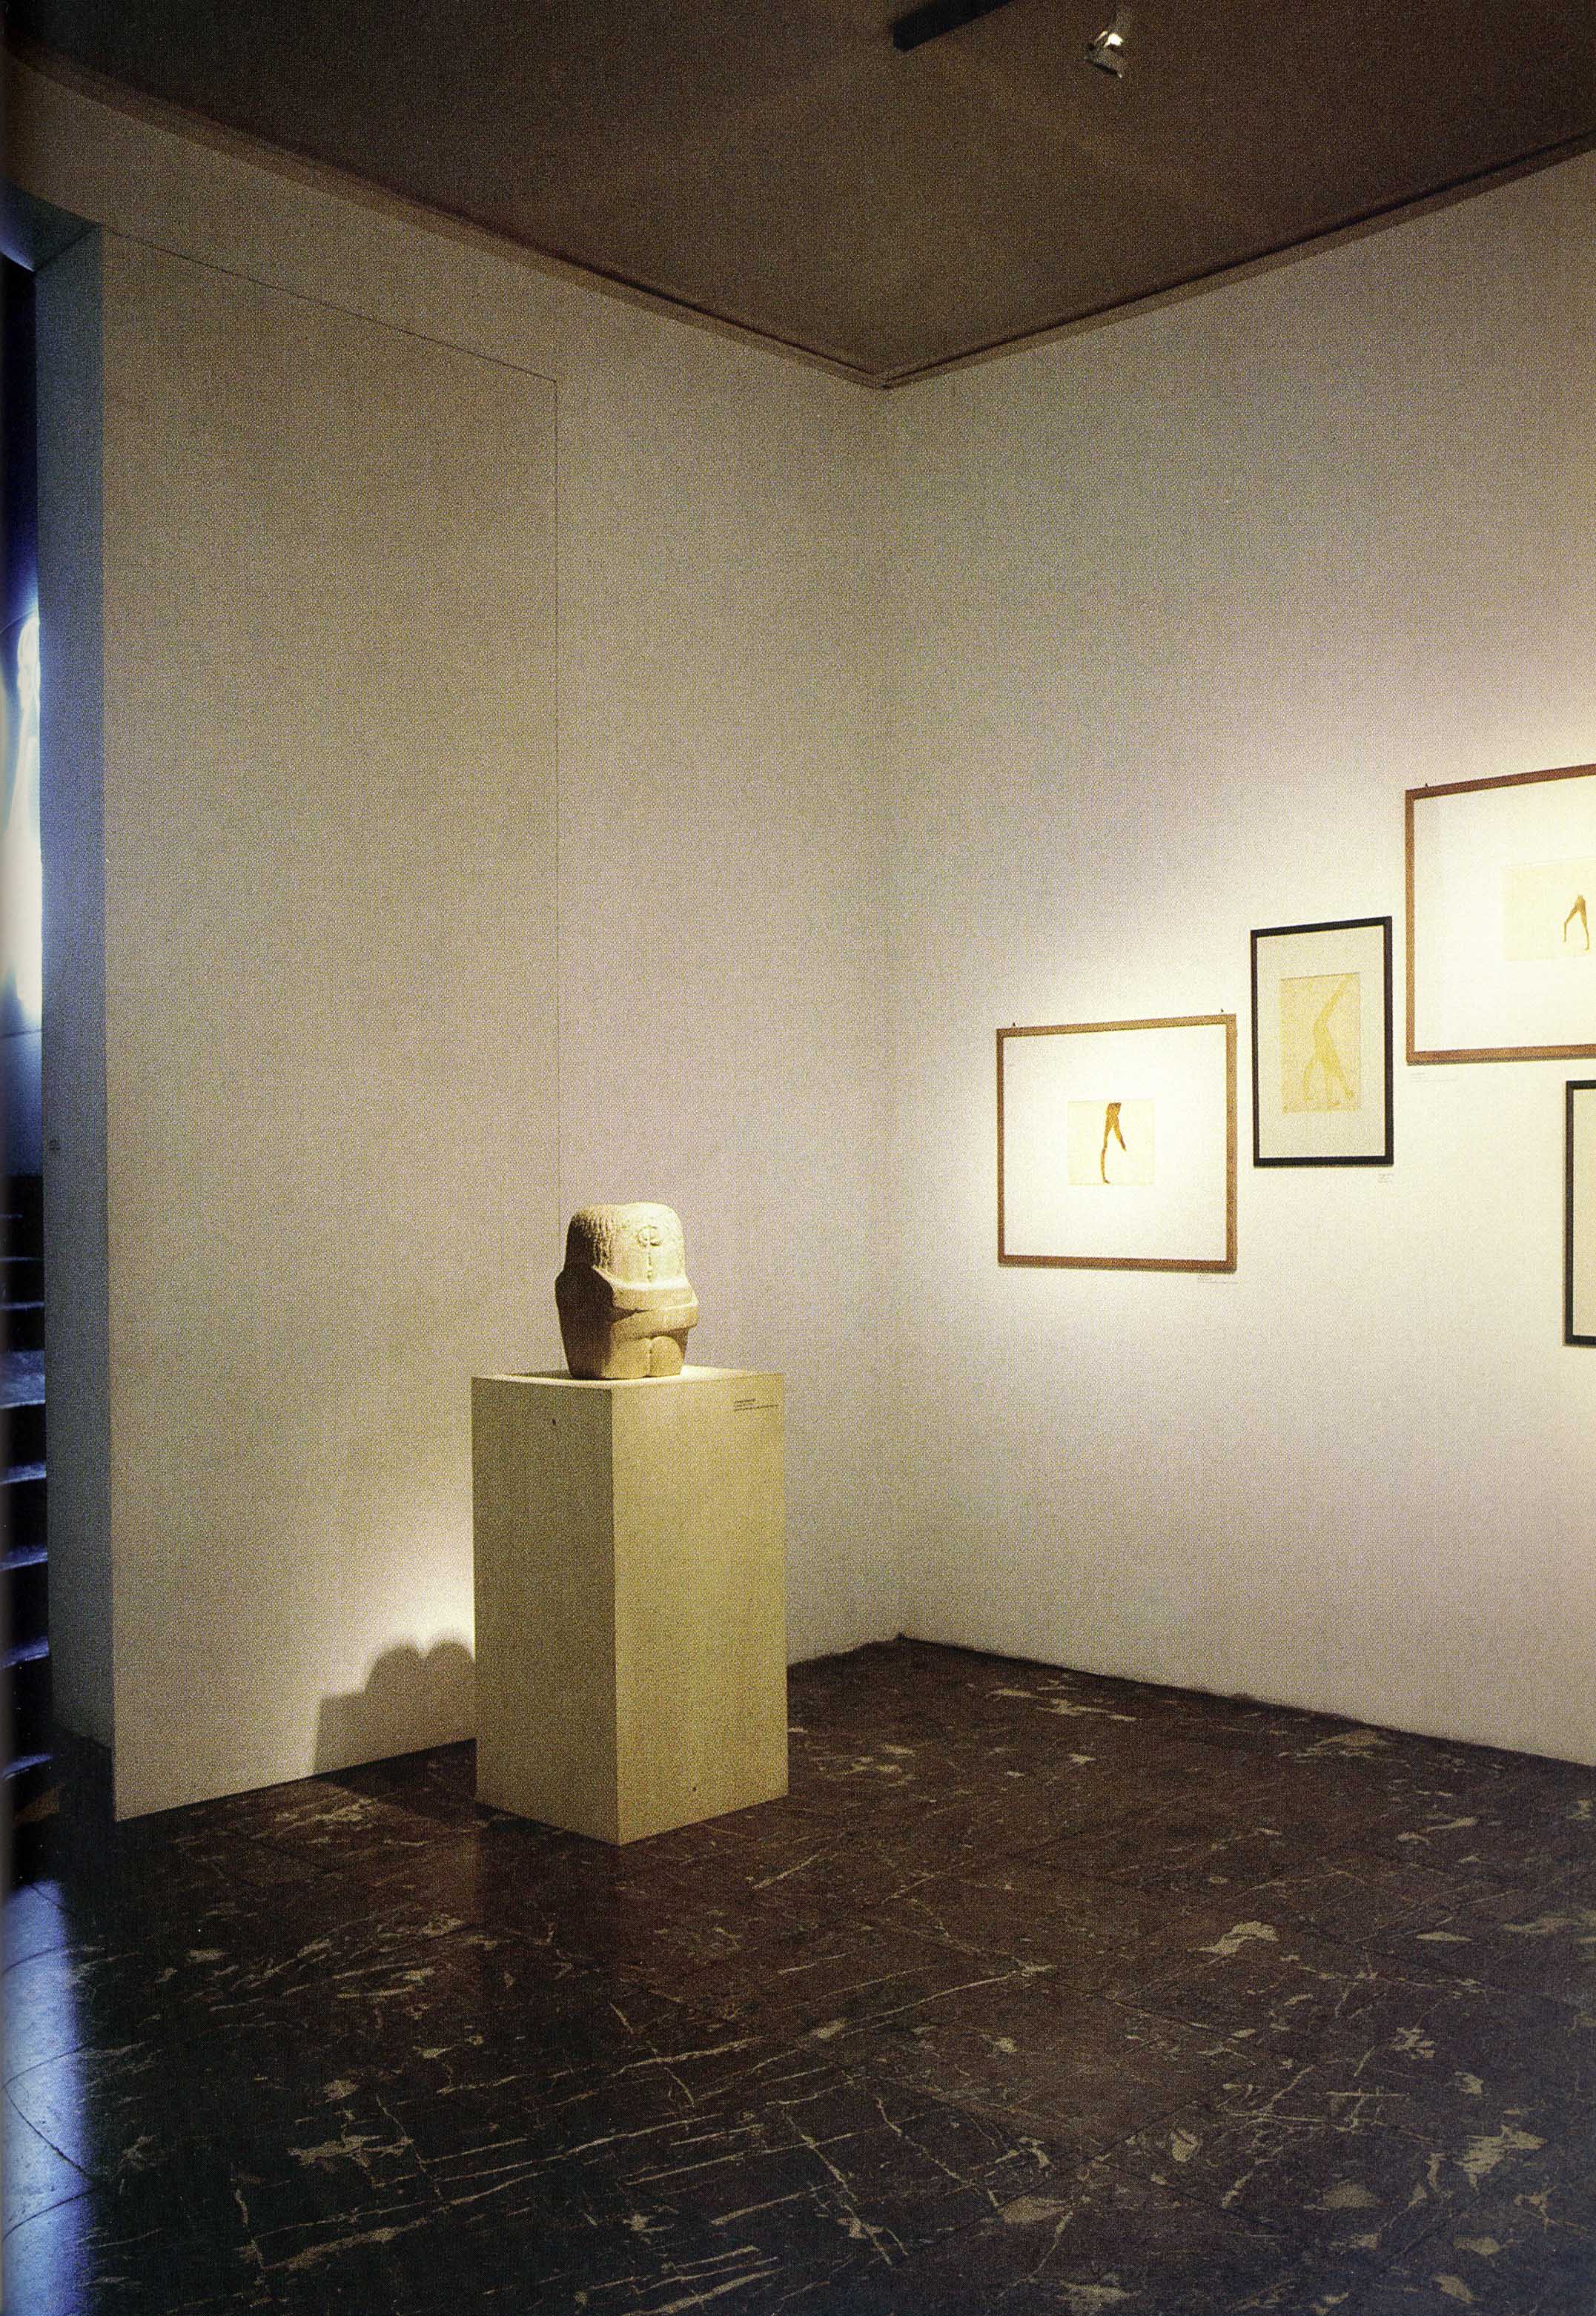   Nous voici, The Two of Us : Works by Brancusi, Beuys, Rodin. Photo Philippe De Gobert. 